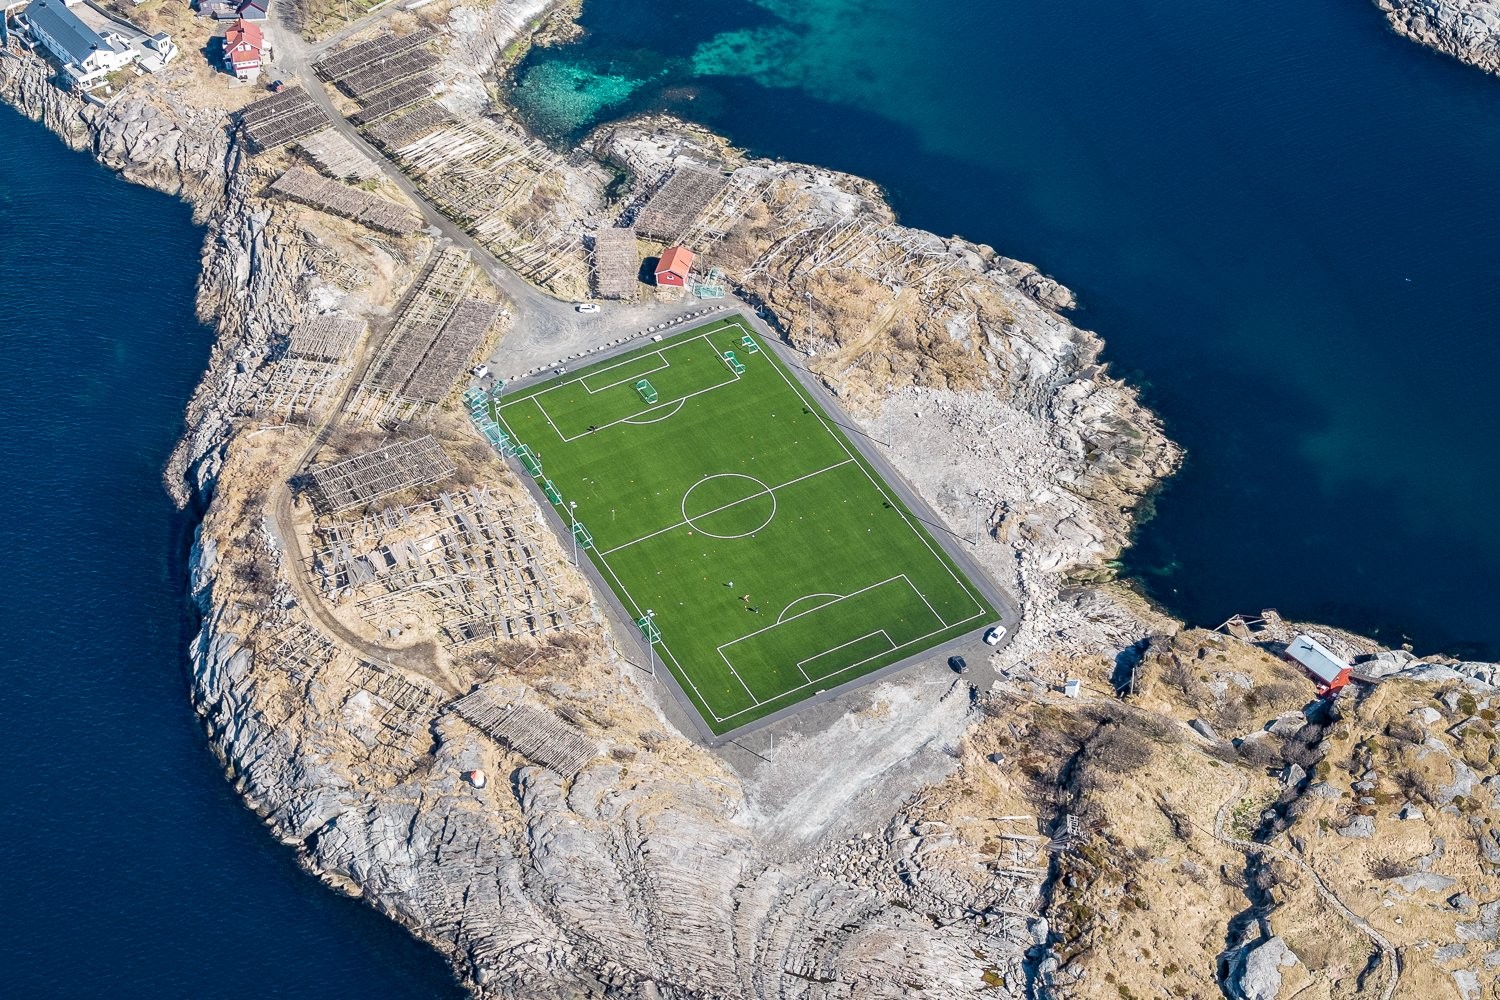 General 1500x1000 landscape field soccer soccer pitches sea Lofoten Norway aerial view